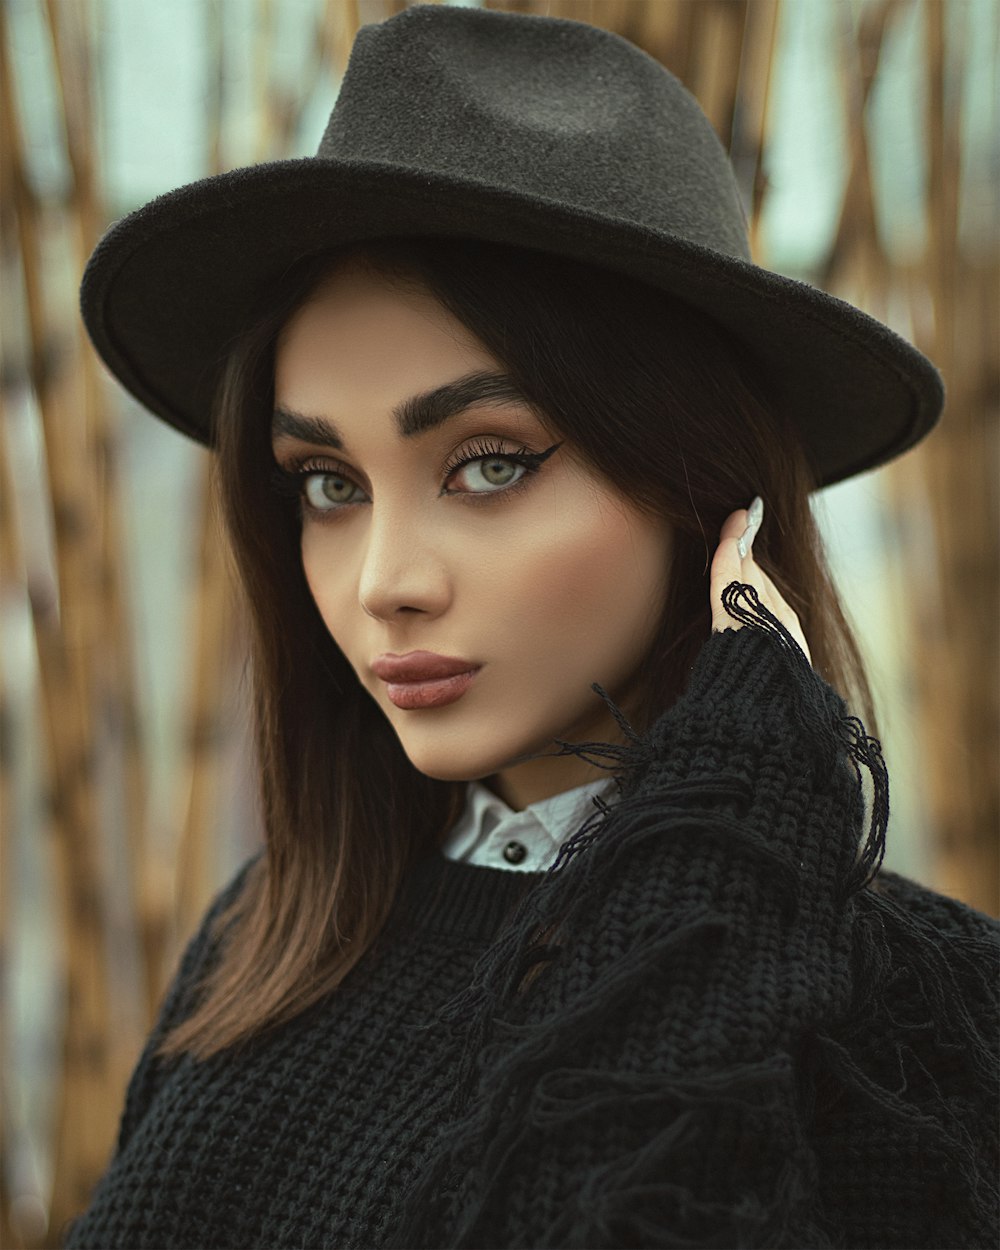 woman in black hat and black sweater